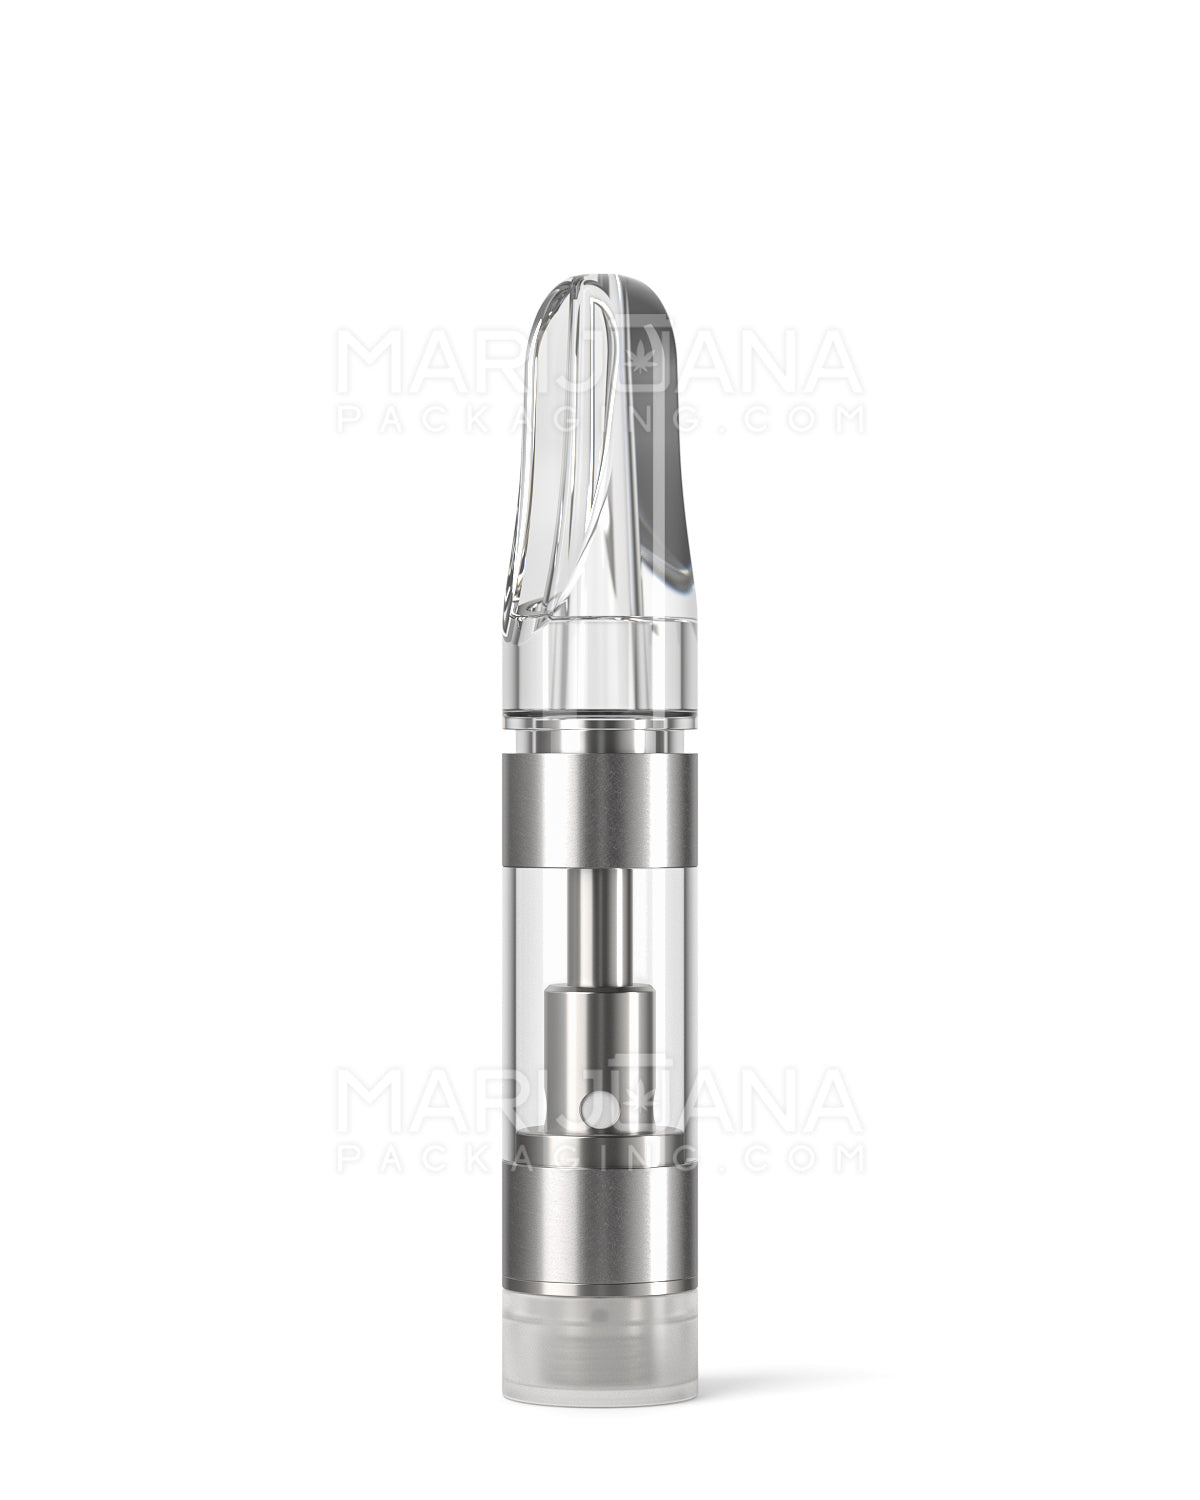 CCELL | Liquid6 Reactor Plastic Vape Cartridge with Clear Plastic Mouthpiece | 0.5mL - Press On - 100 Count - 3